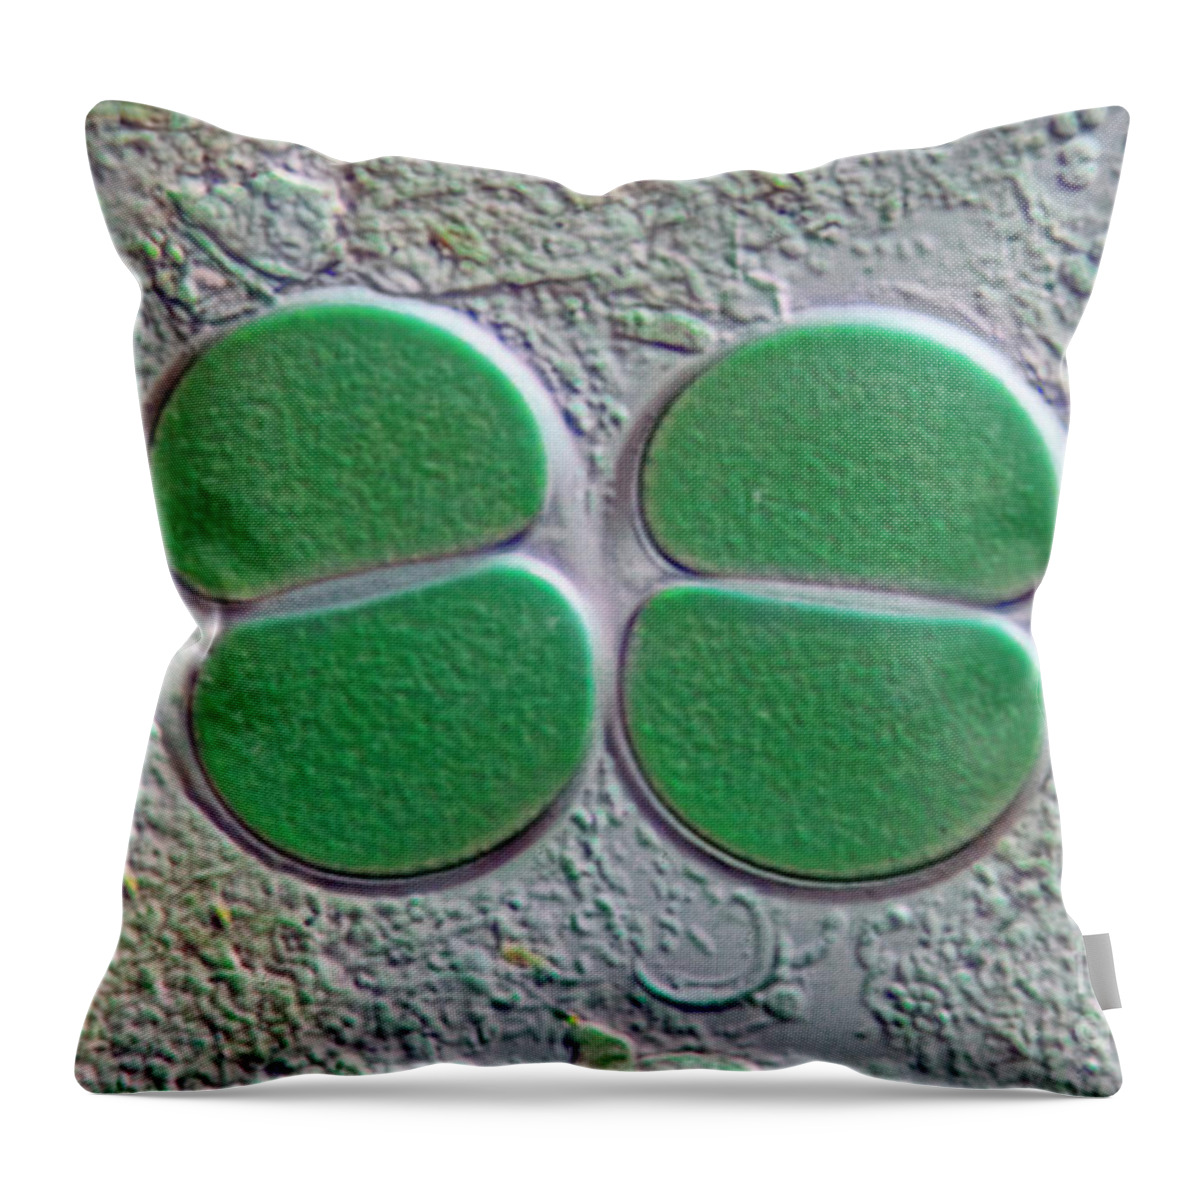 Chroococcus Throw Pillow featuring the photograph Chroococcus, Dic by M. I. Walker